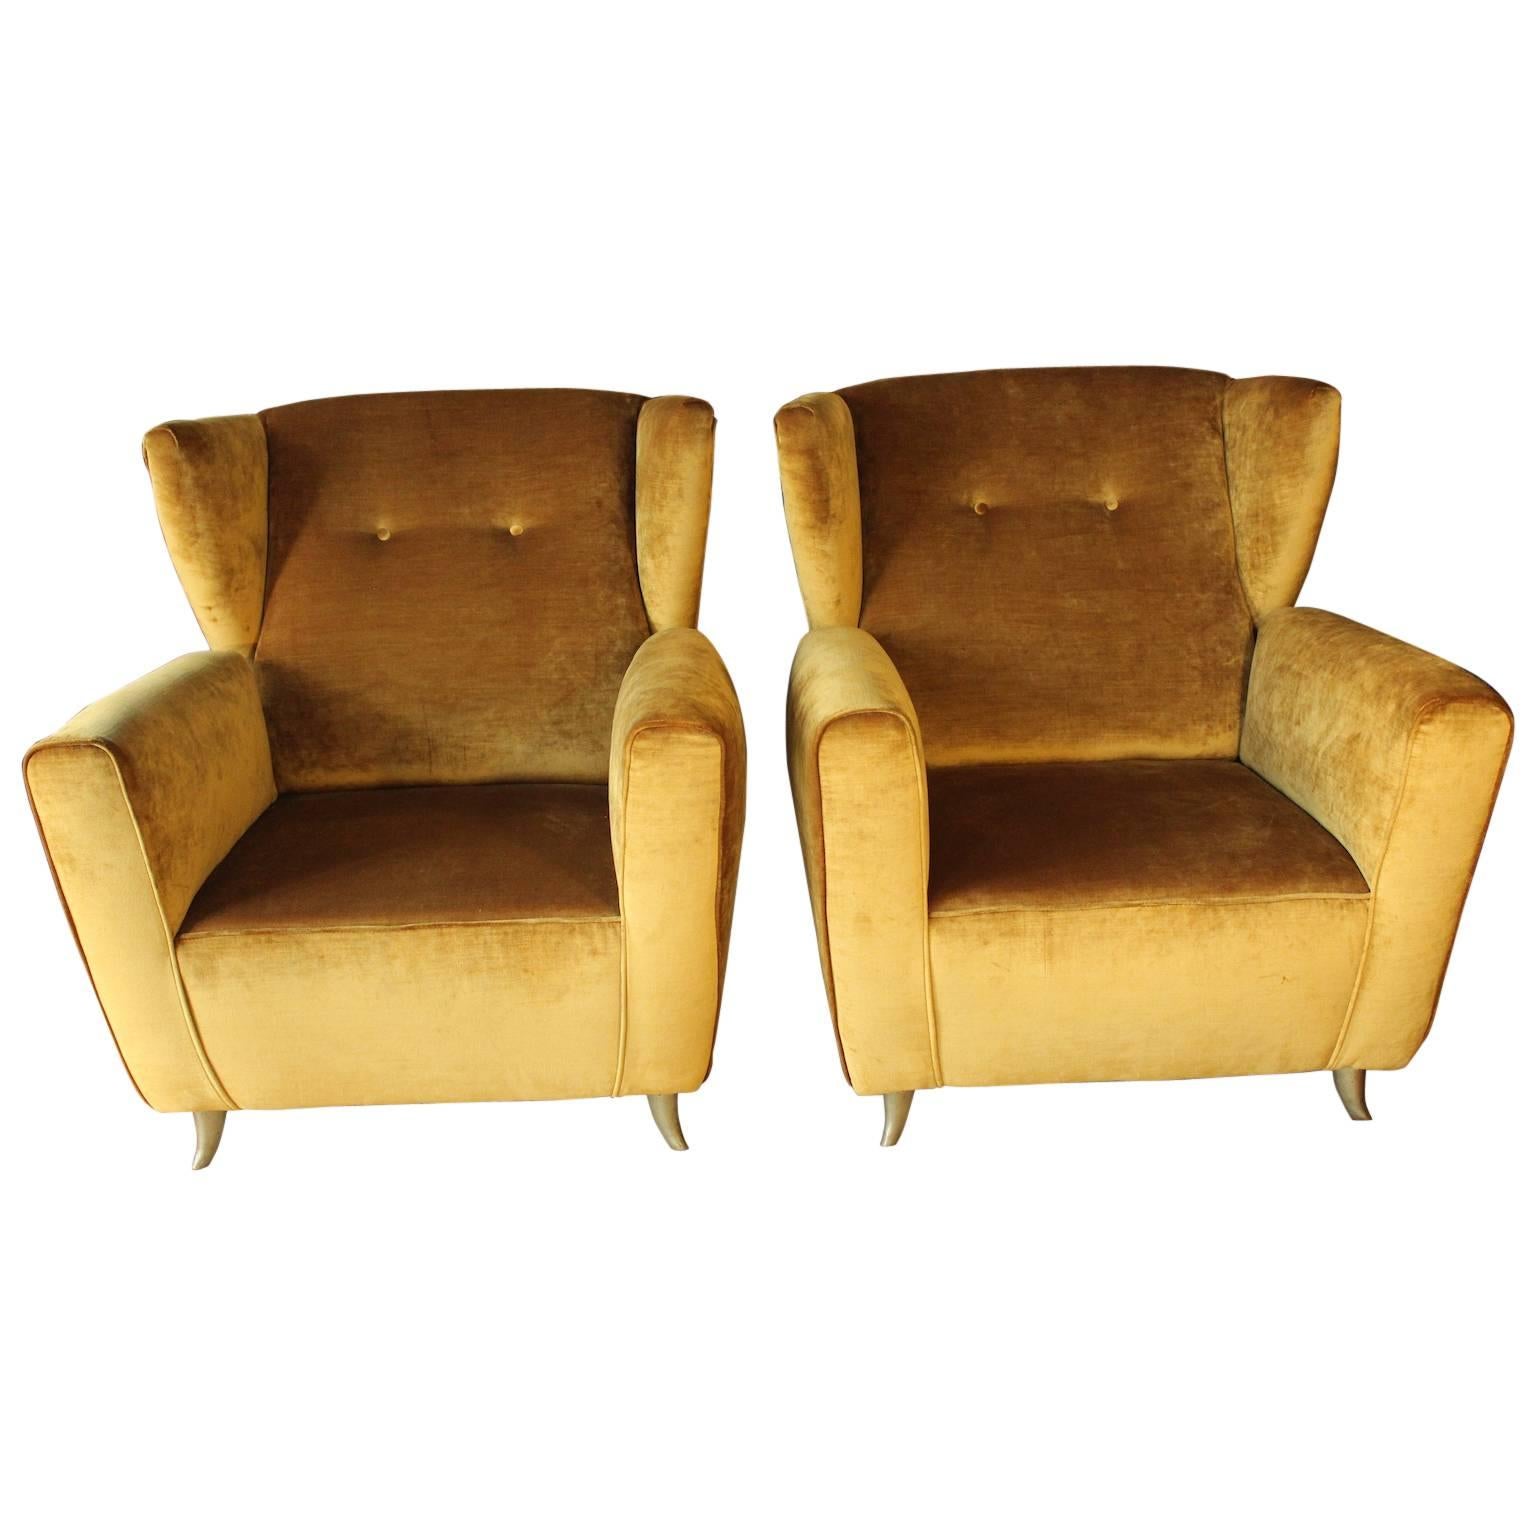 Pair of Contemporary Gold Velvet Armchairs with Brass Fittings, 1960s Style